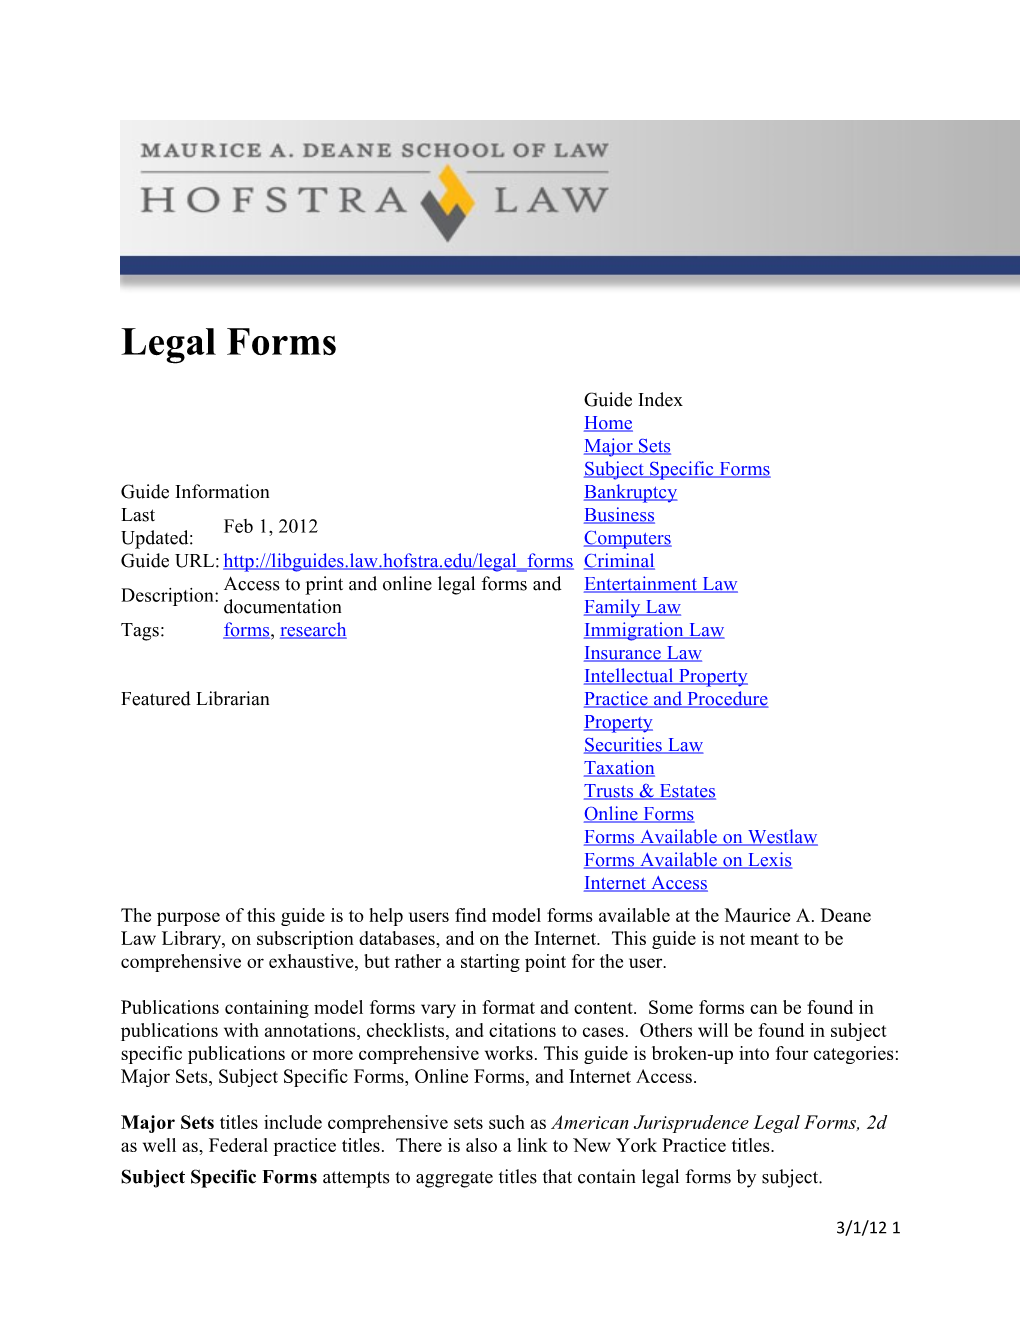 Subject Specific Forms Attempts to Aggregate Titles That Contain Legal Forms by Subject